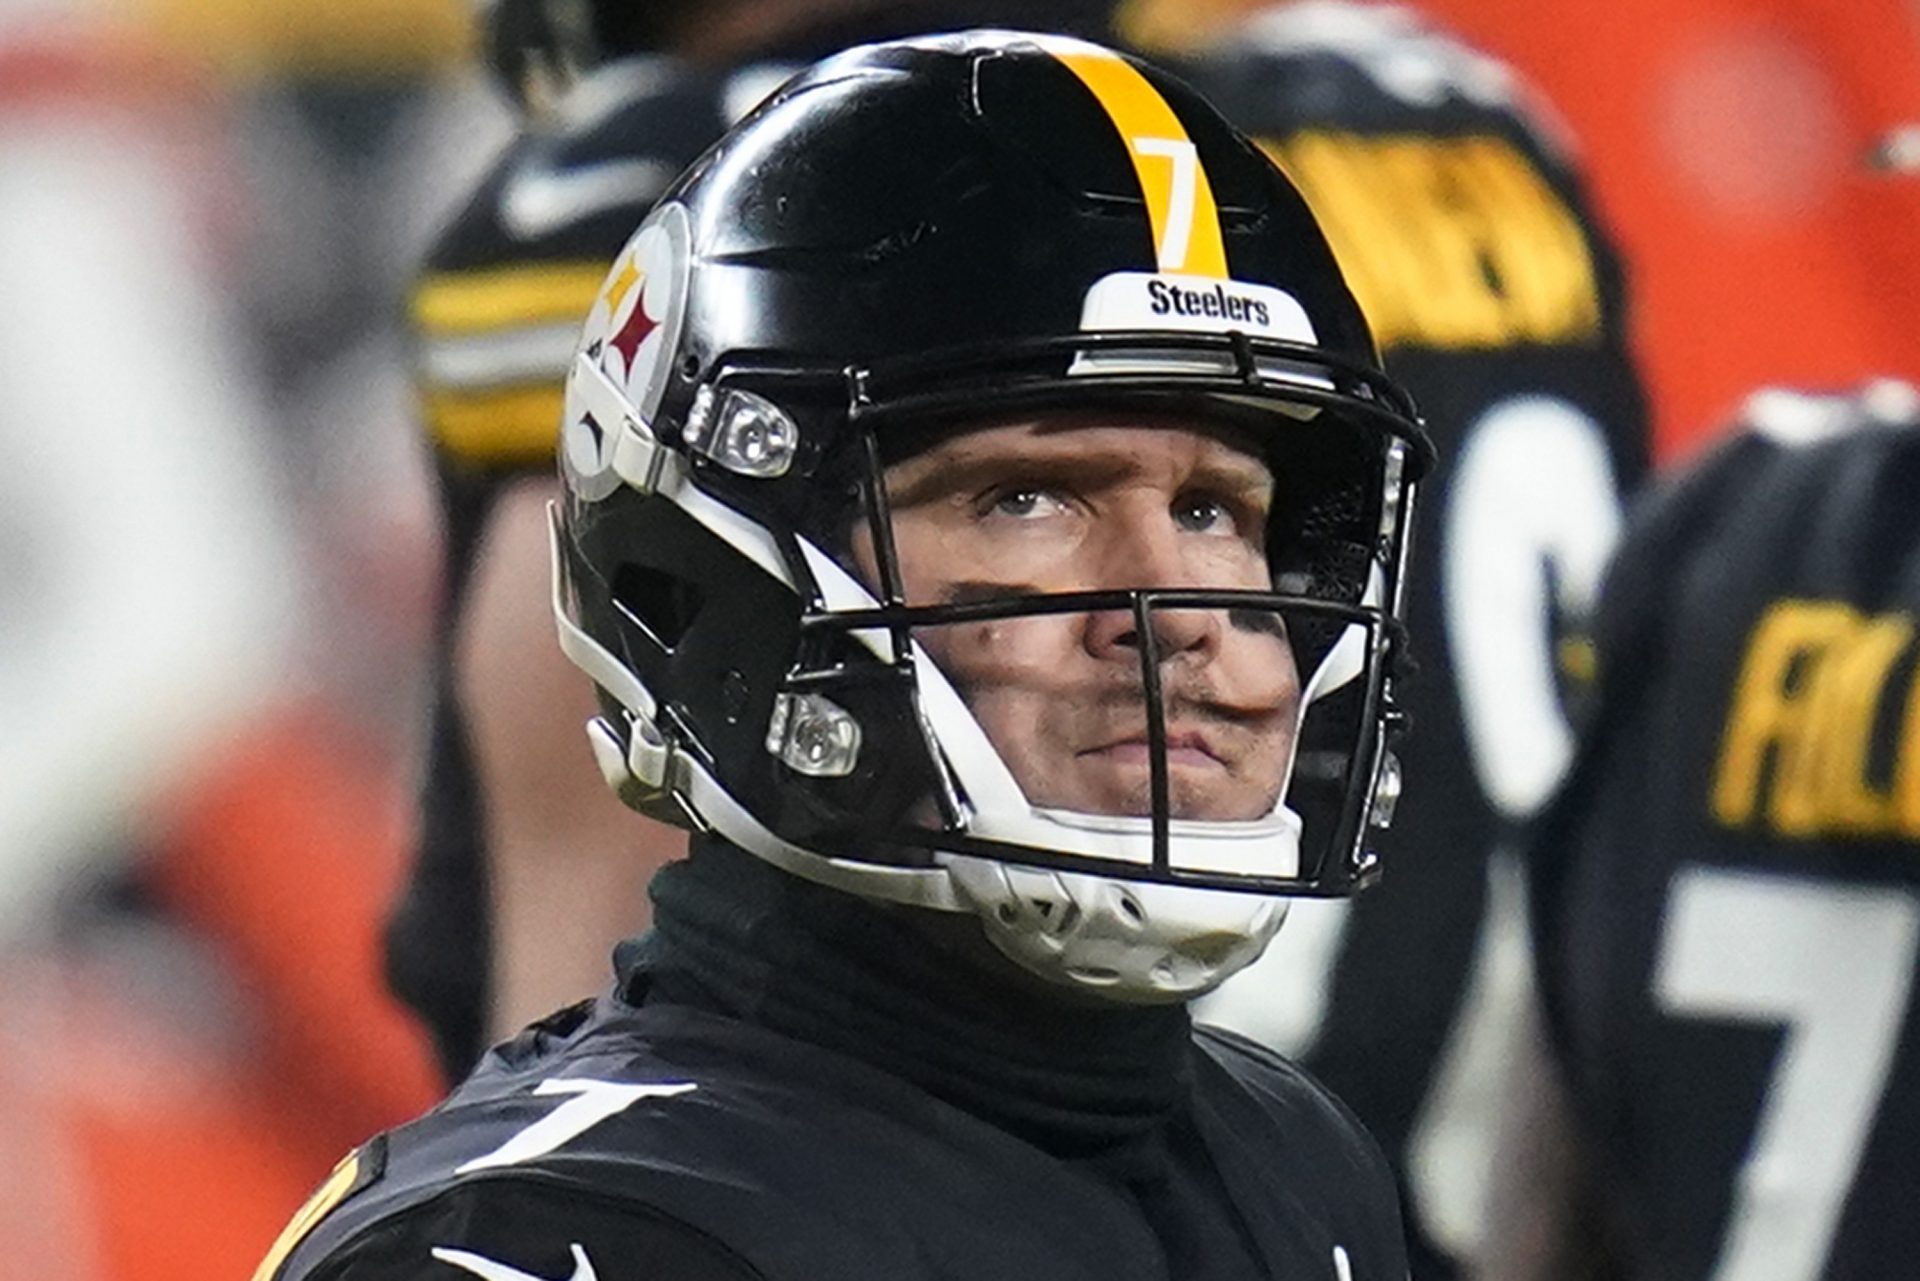 Pittsburgh Steelers quarterback Ben Roethlisberger (7) looks a the scoreboard as he walks off the field during the first half of an NFL wild-card playoff football game against the Cleveland Browns, Sunday, Jan. 10, 2021, in Pittsburgh